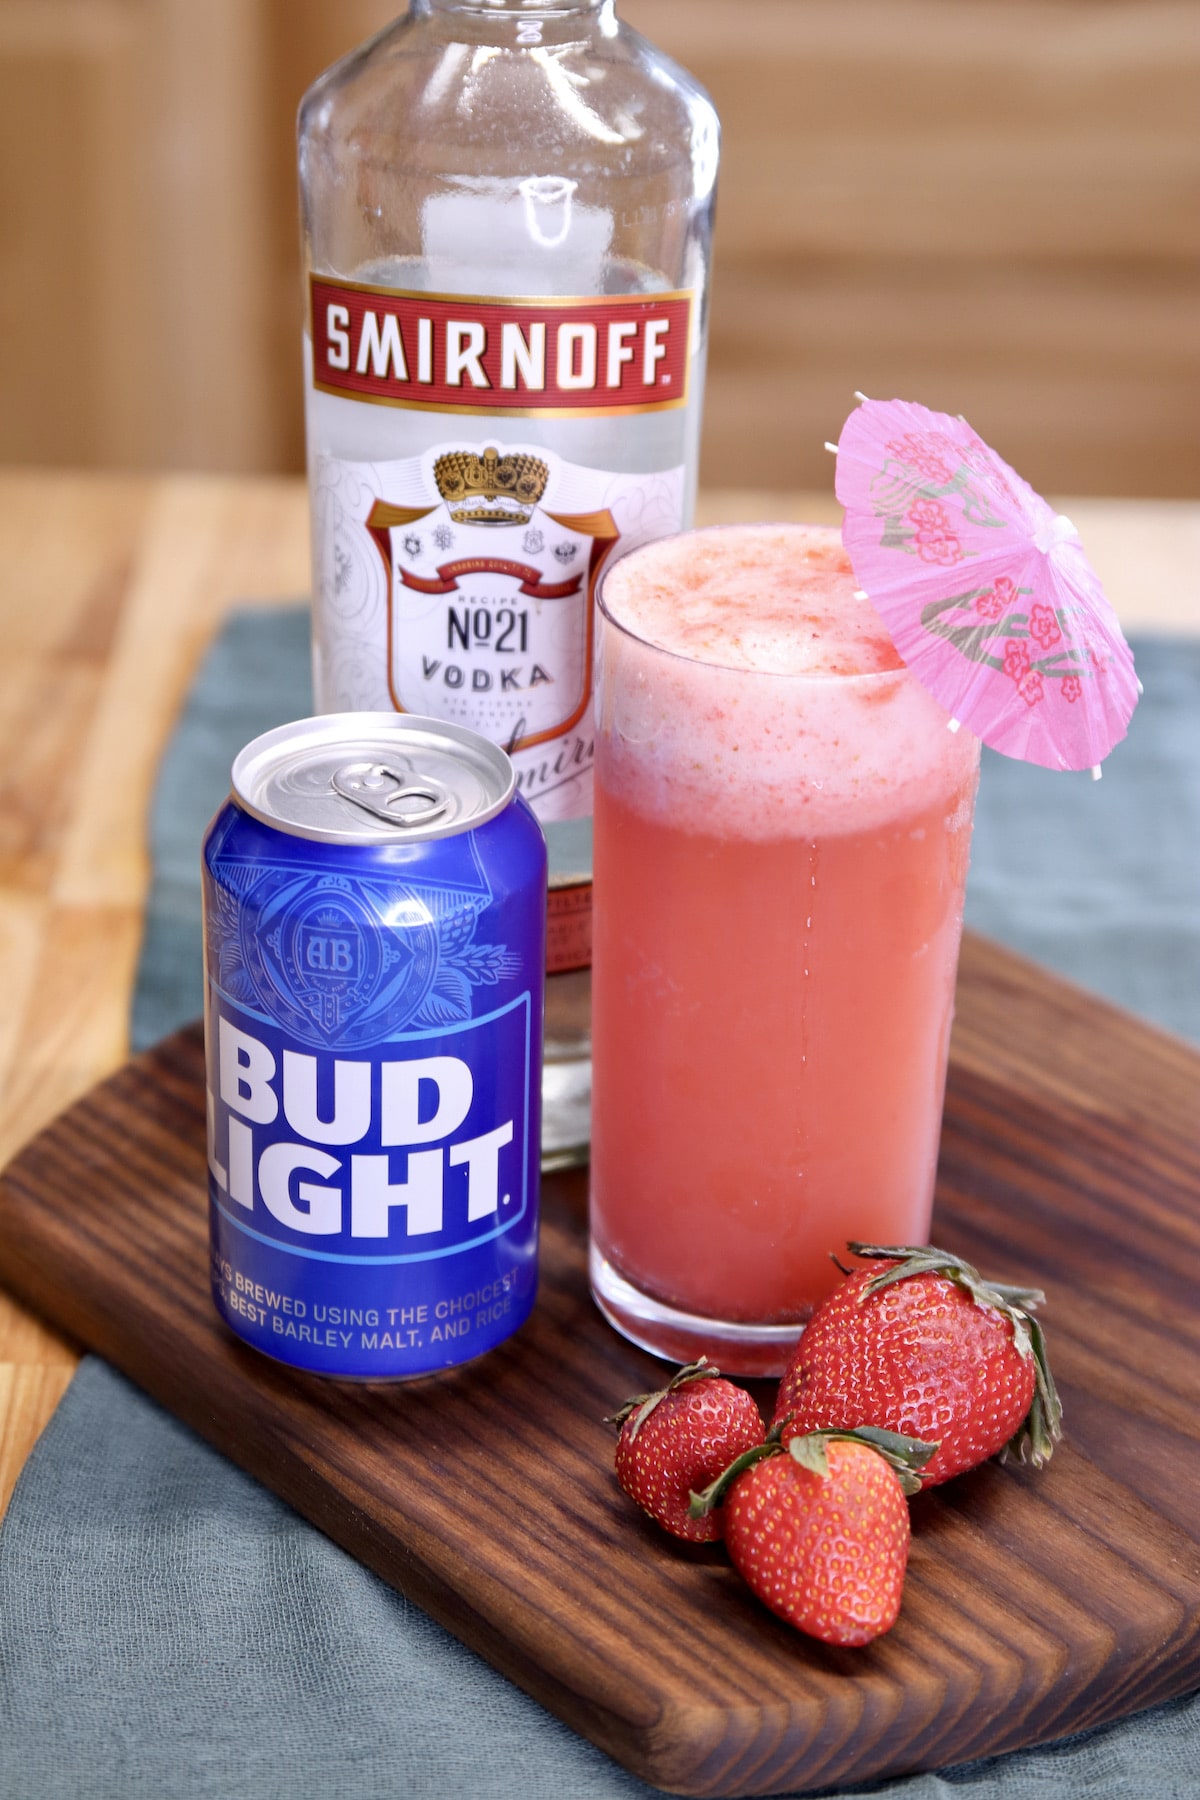 strawberry shandy cocktail with a can of bud light beer and bottle of smirnoff vodka.